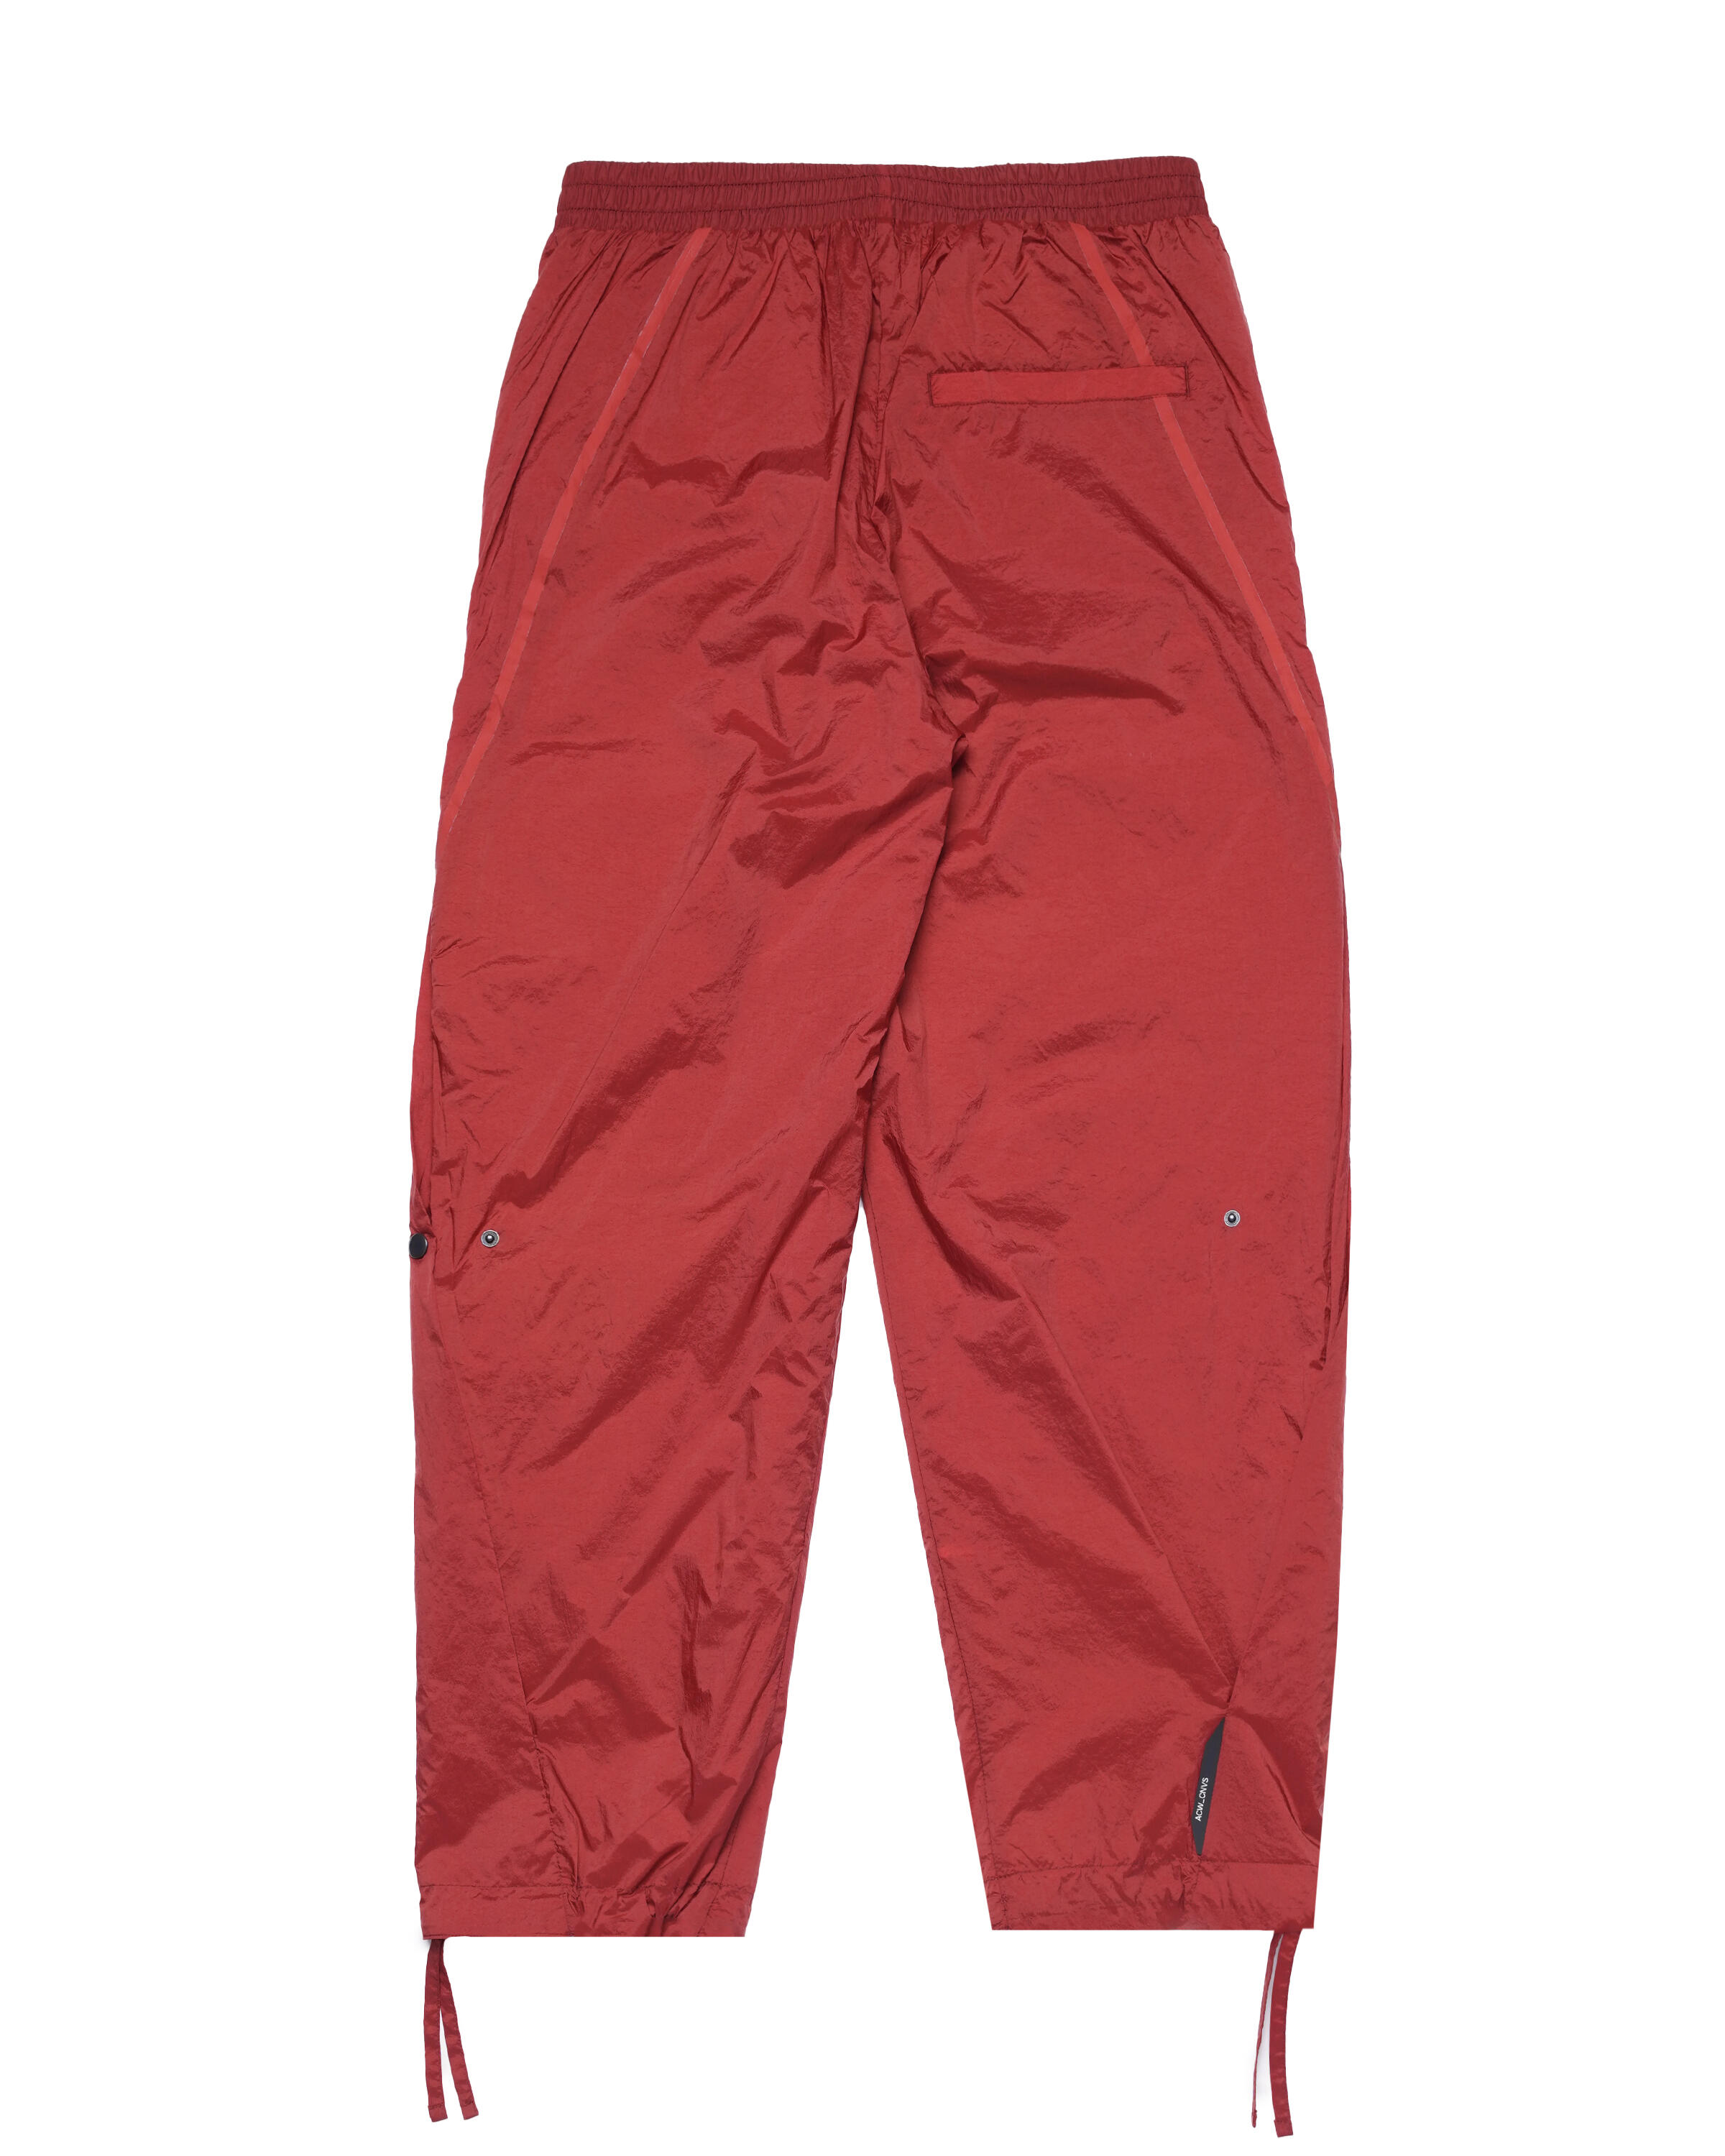 Converse x A-COLD-WALL* Reversible WIND PANT